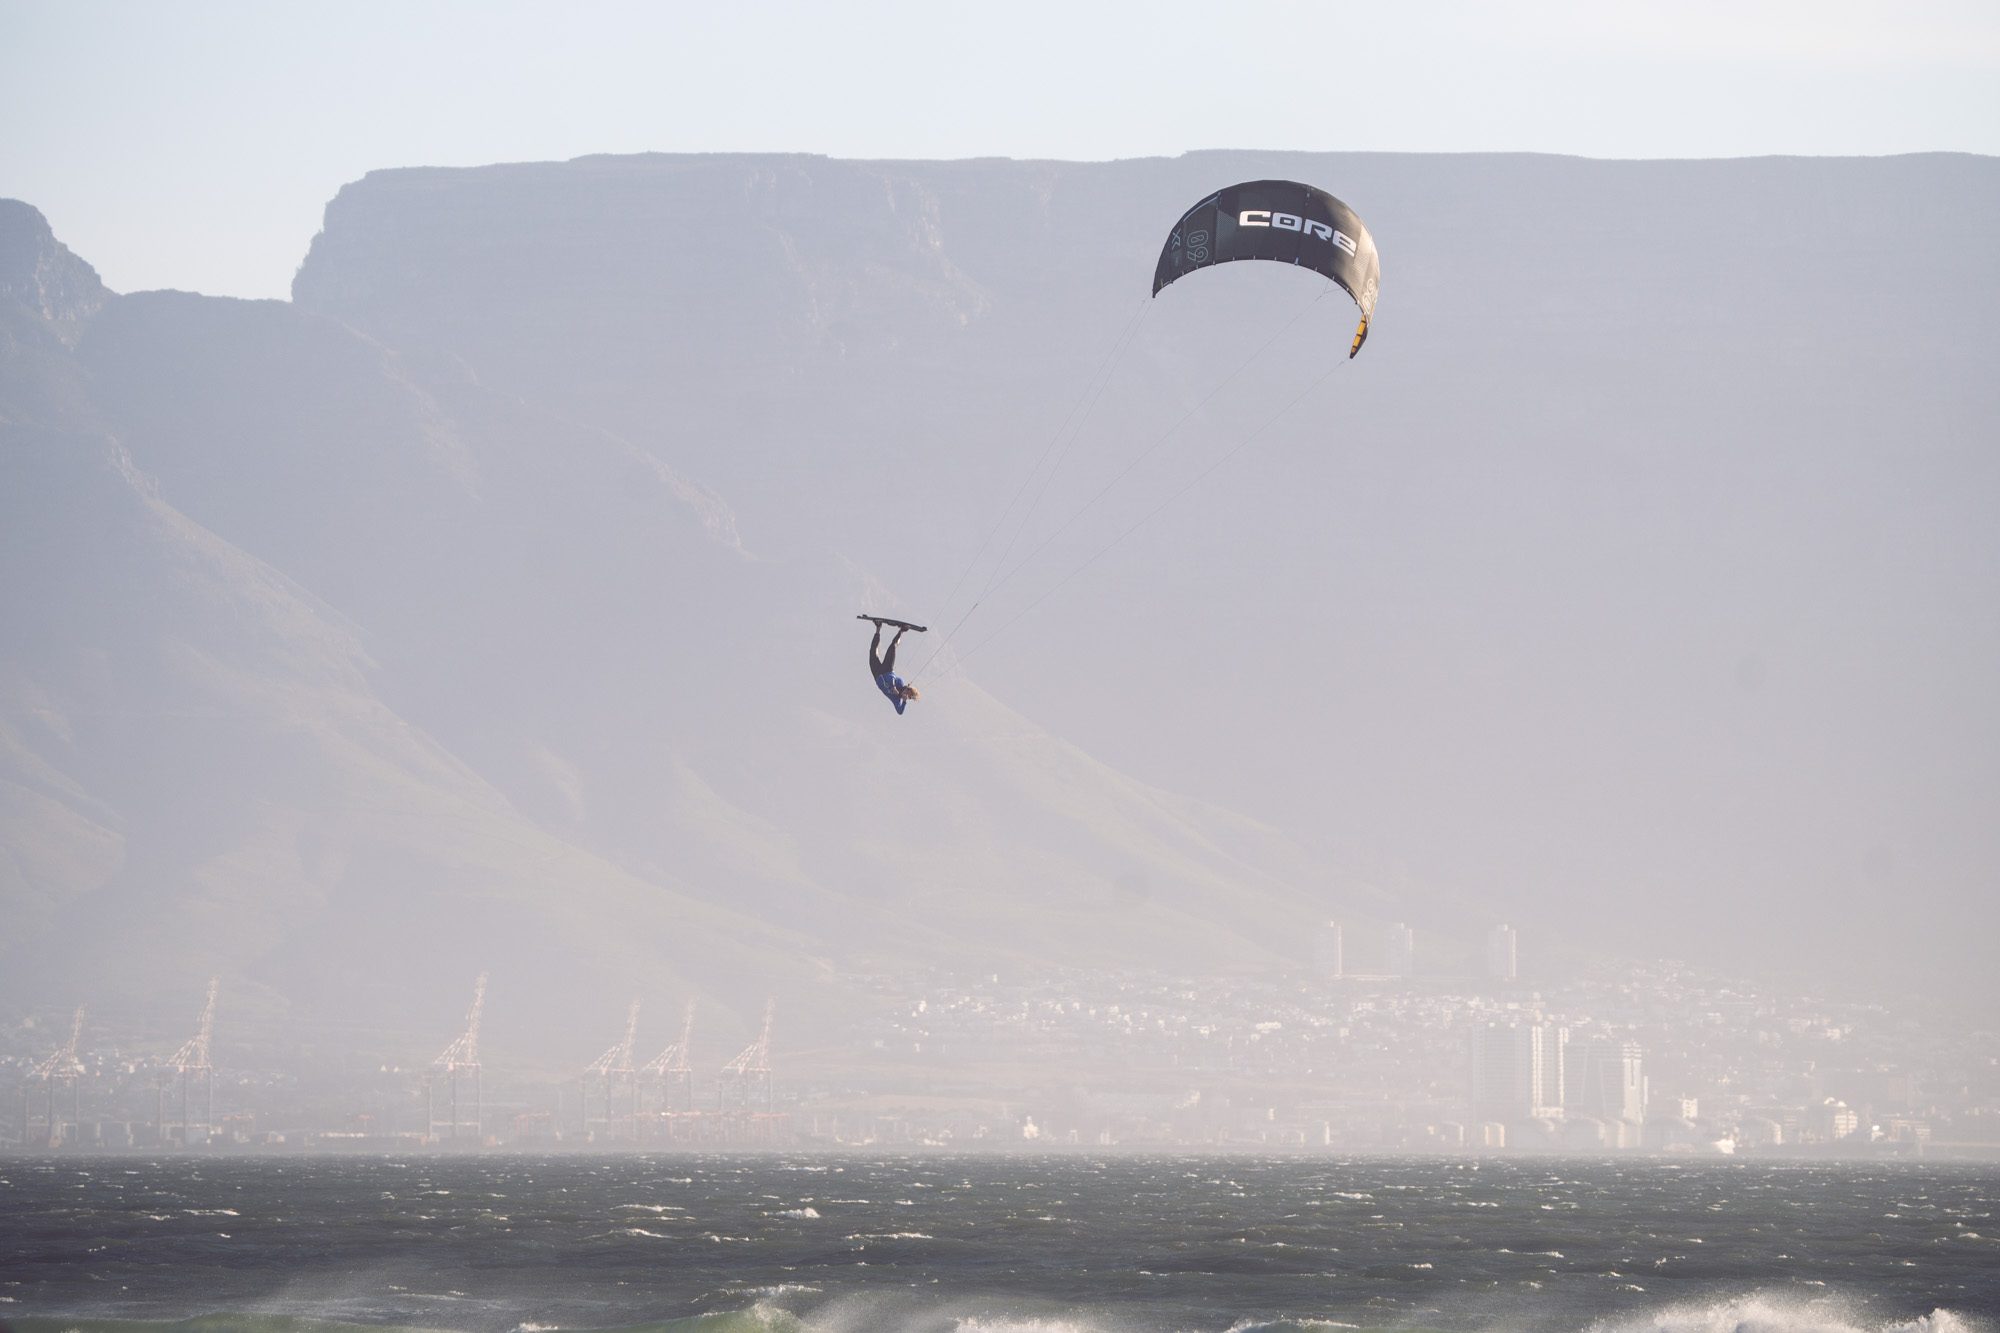 Advanced Kite Surf Lessons in Cape Town with Atlantic Kite Surf School . Enhance Your Kitesurfing Skills